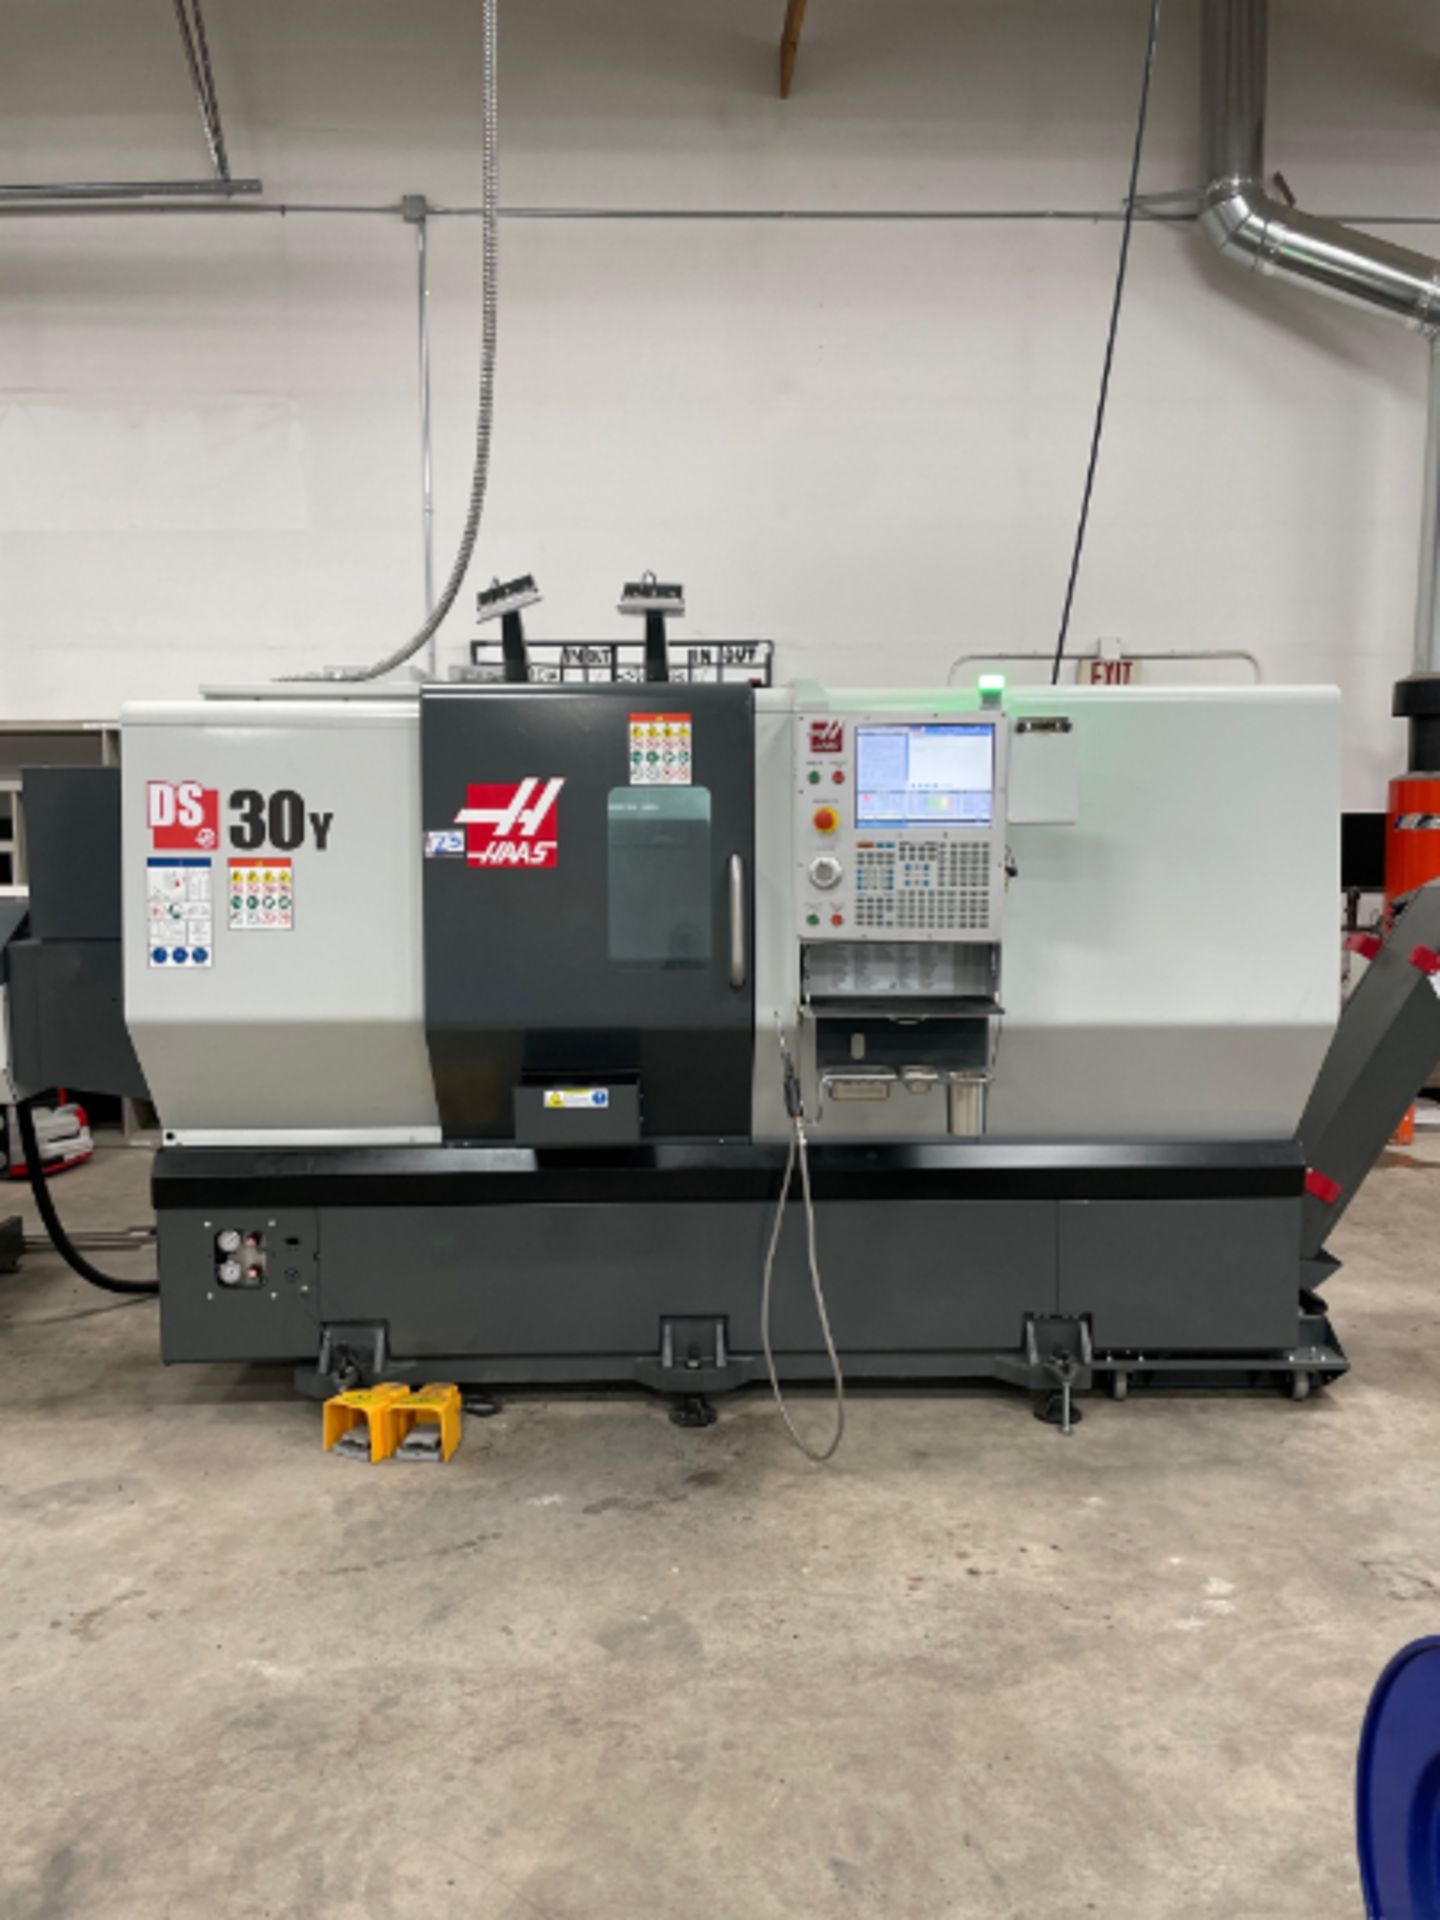 Haas DS30Y Dual Spindle 4-Axis CNC Lathe, 10” Chuck, 12.5” x 23”, 31” Swing, New 2020 - Image 4 of 10